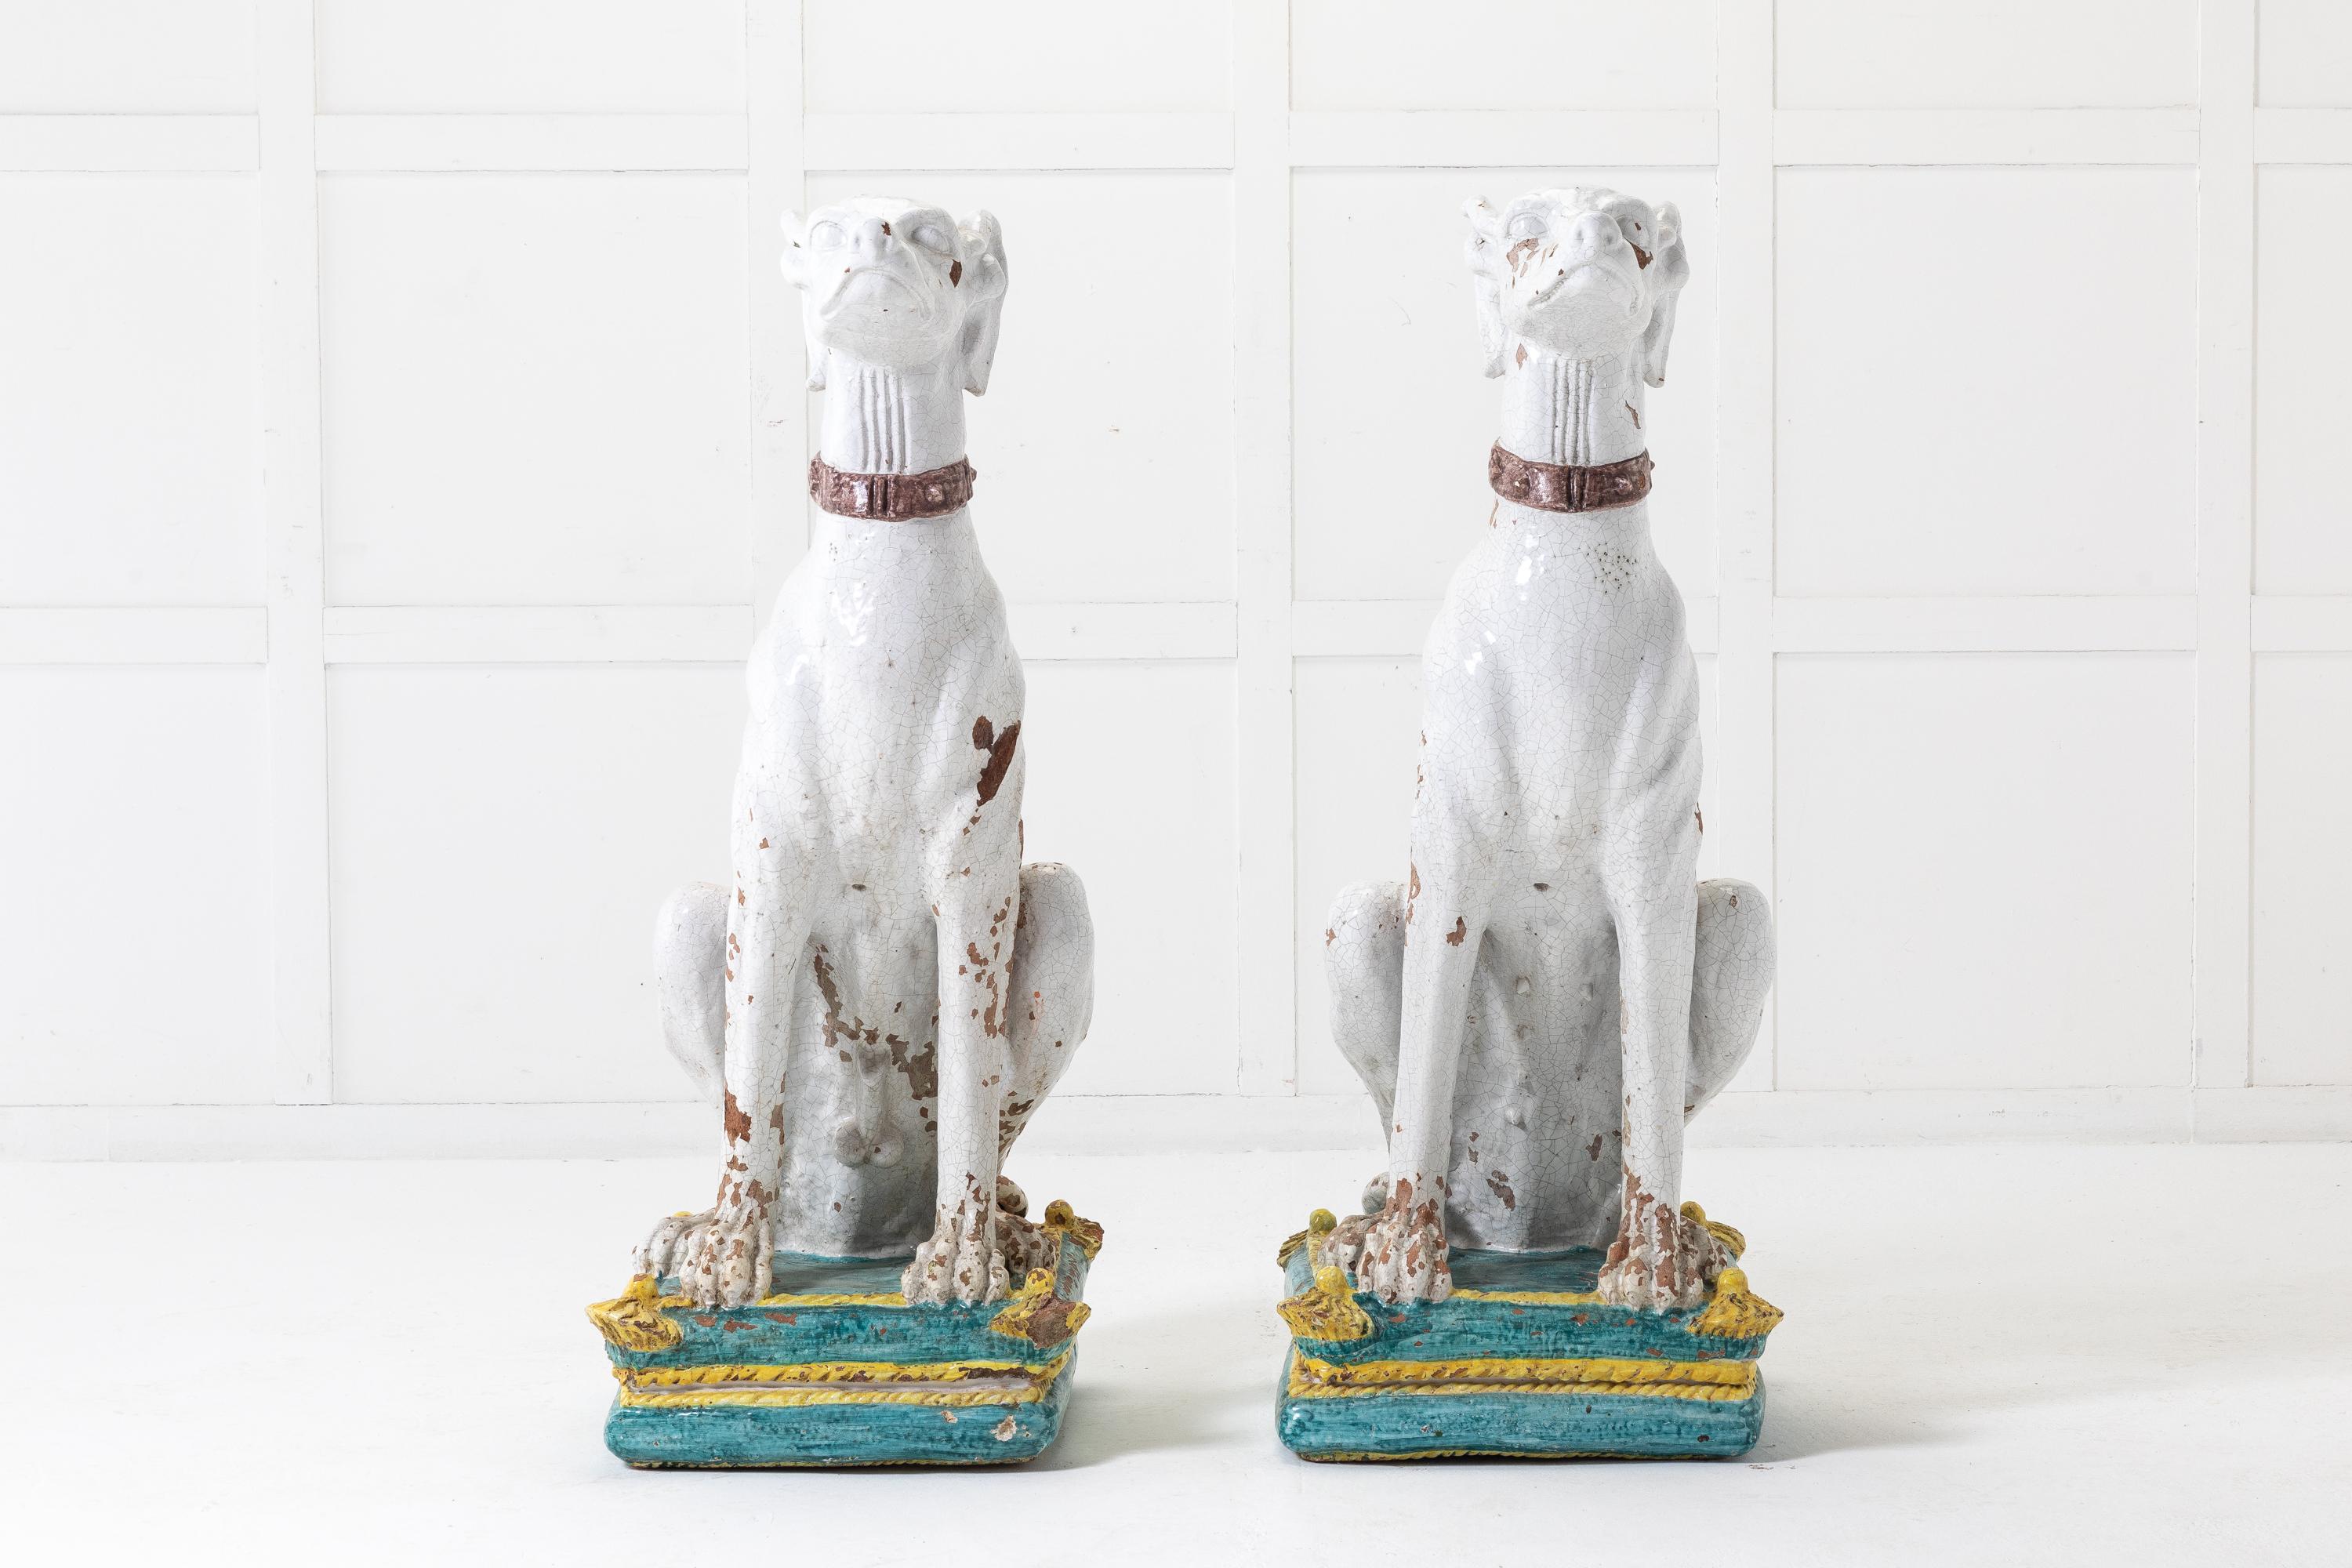 A fine and imposing pair of Italian 1950s majolica glazed dogs, male and female. Each one fitted with a wide collar, realistically modelled with expressive faces and poise, elegantly seated on their bright coloured cushions.

Wonderful decorative